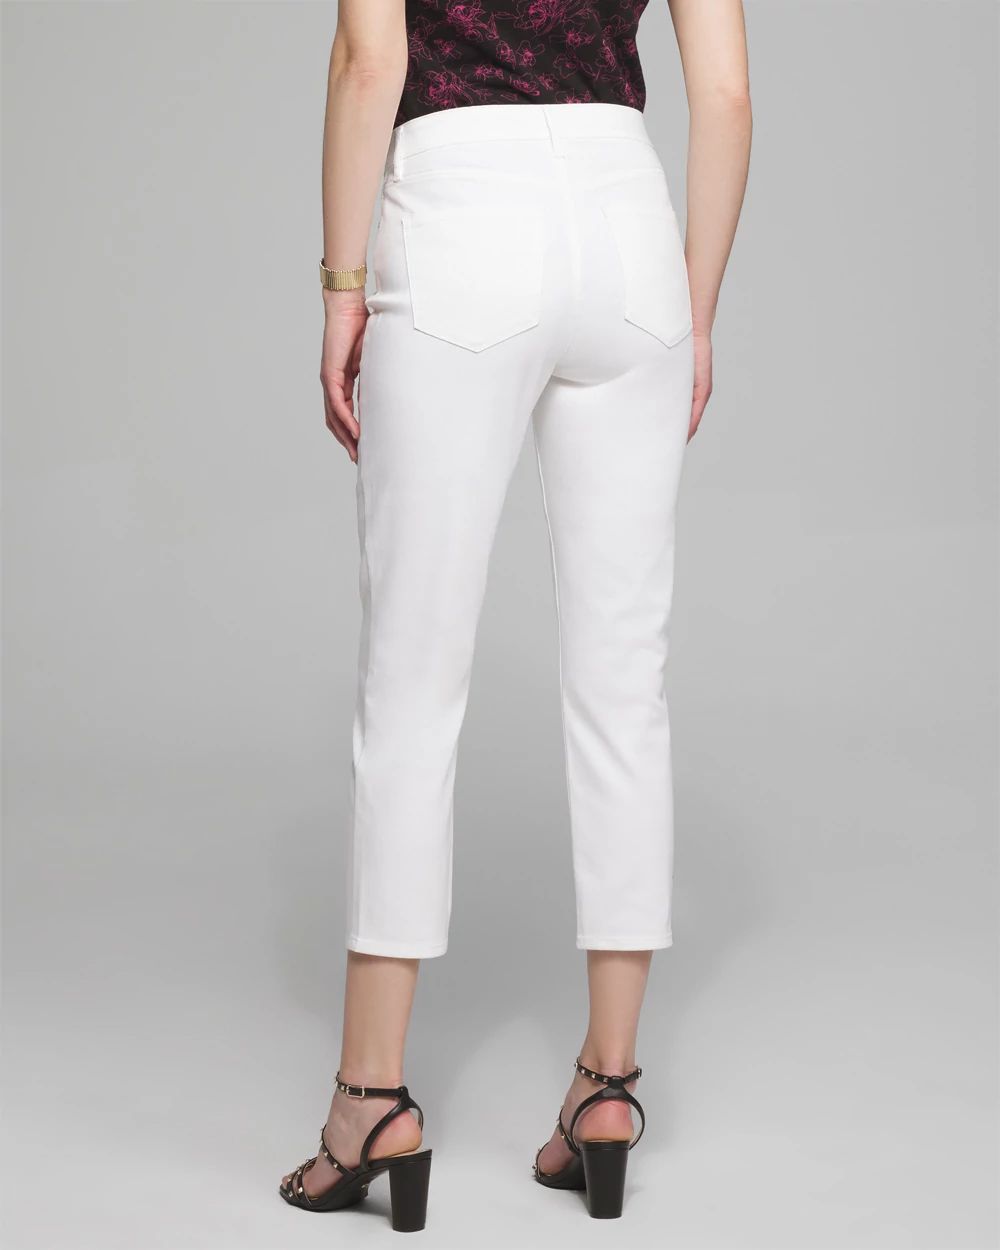 Outlet WHBM High-Rise Slim Crop click to view larger image.